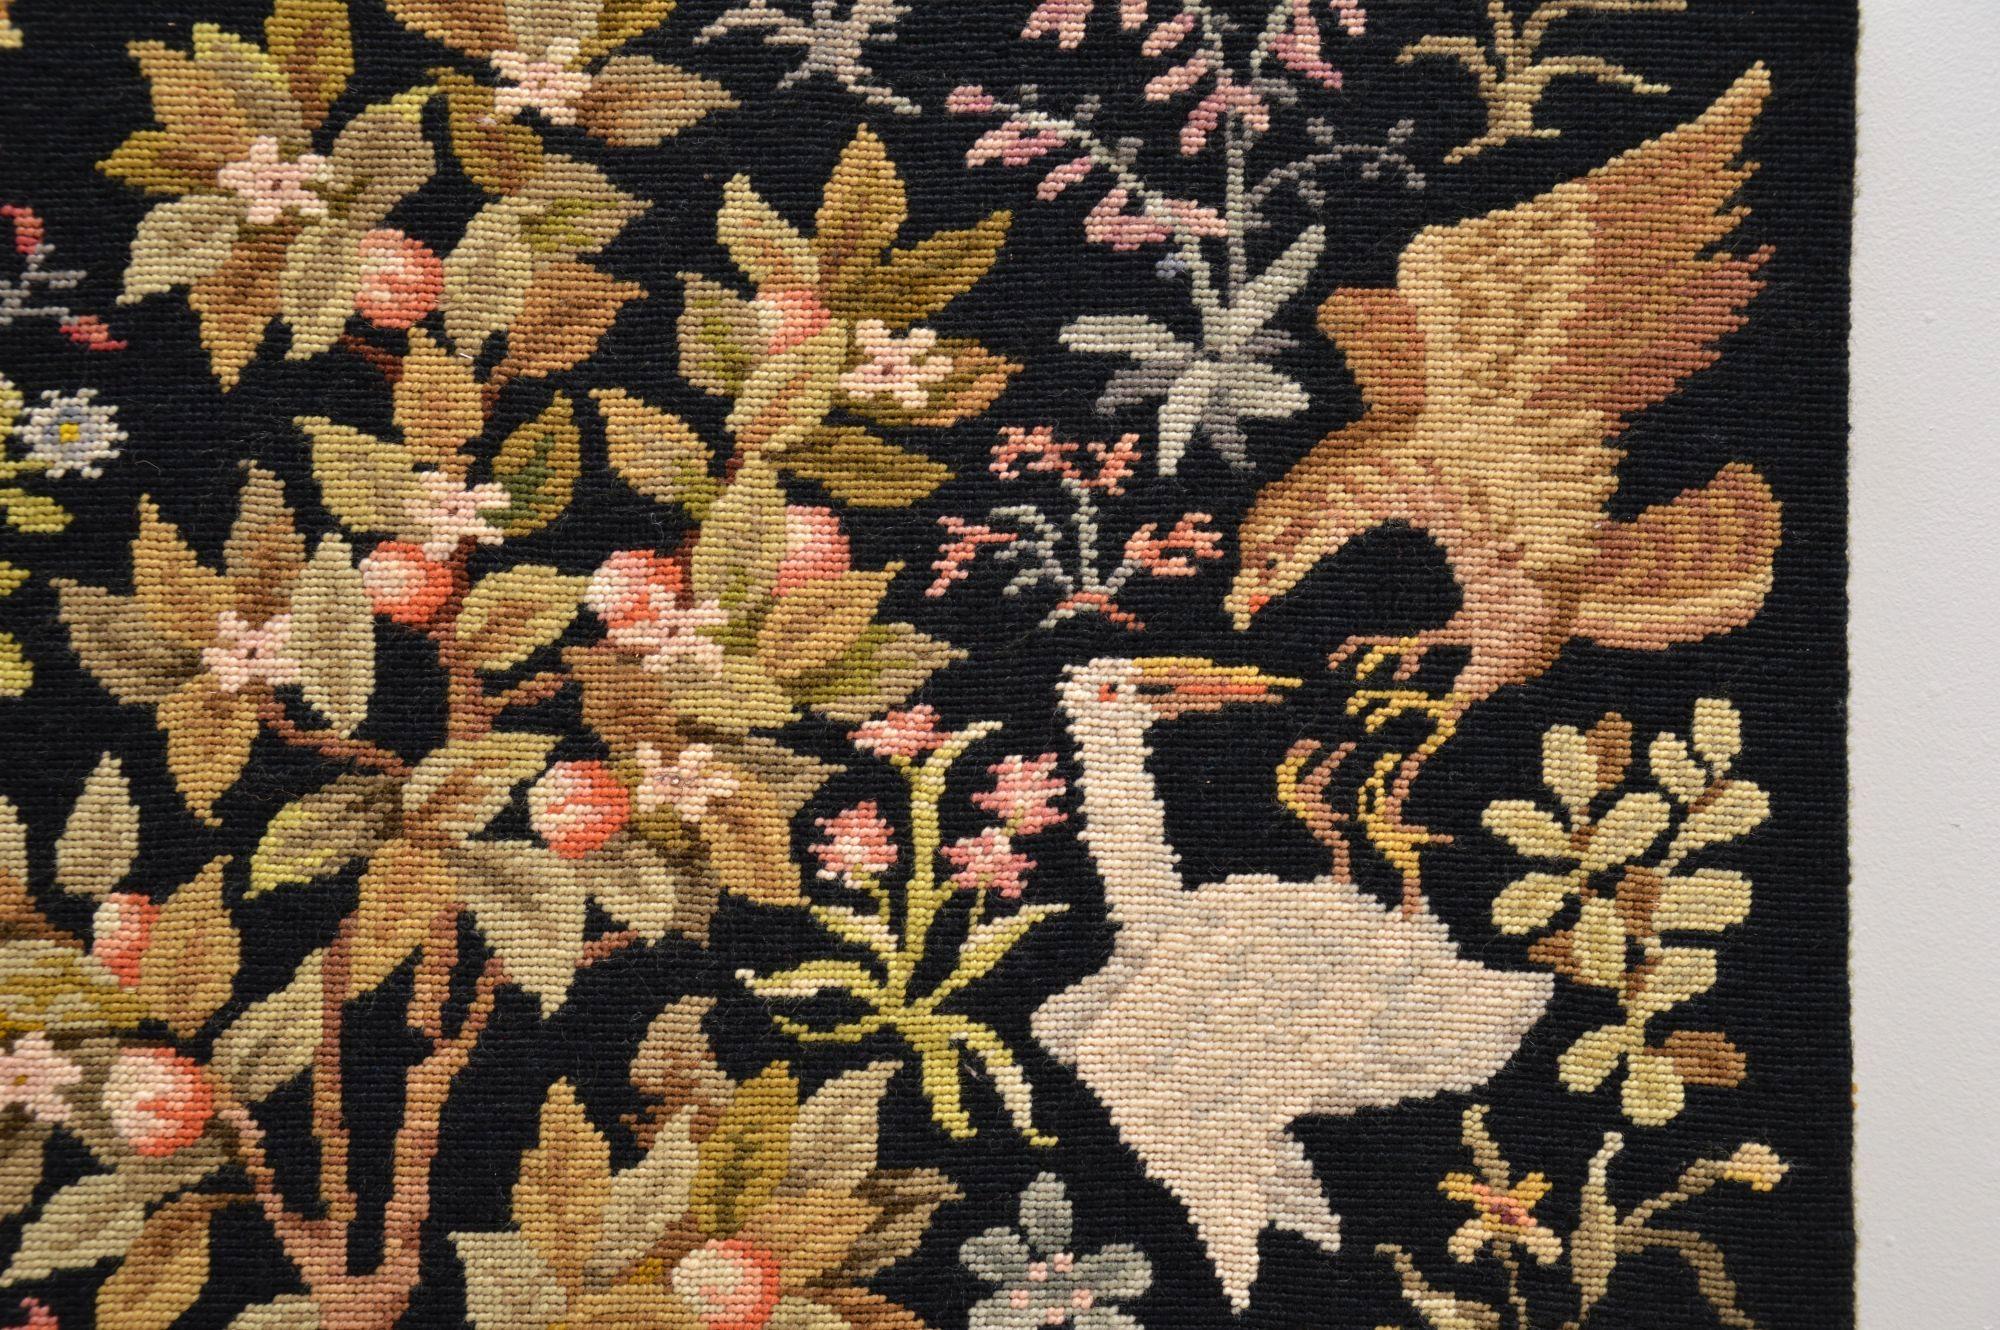 Antique Hand Stitched Tapestry 1